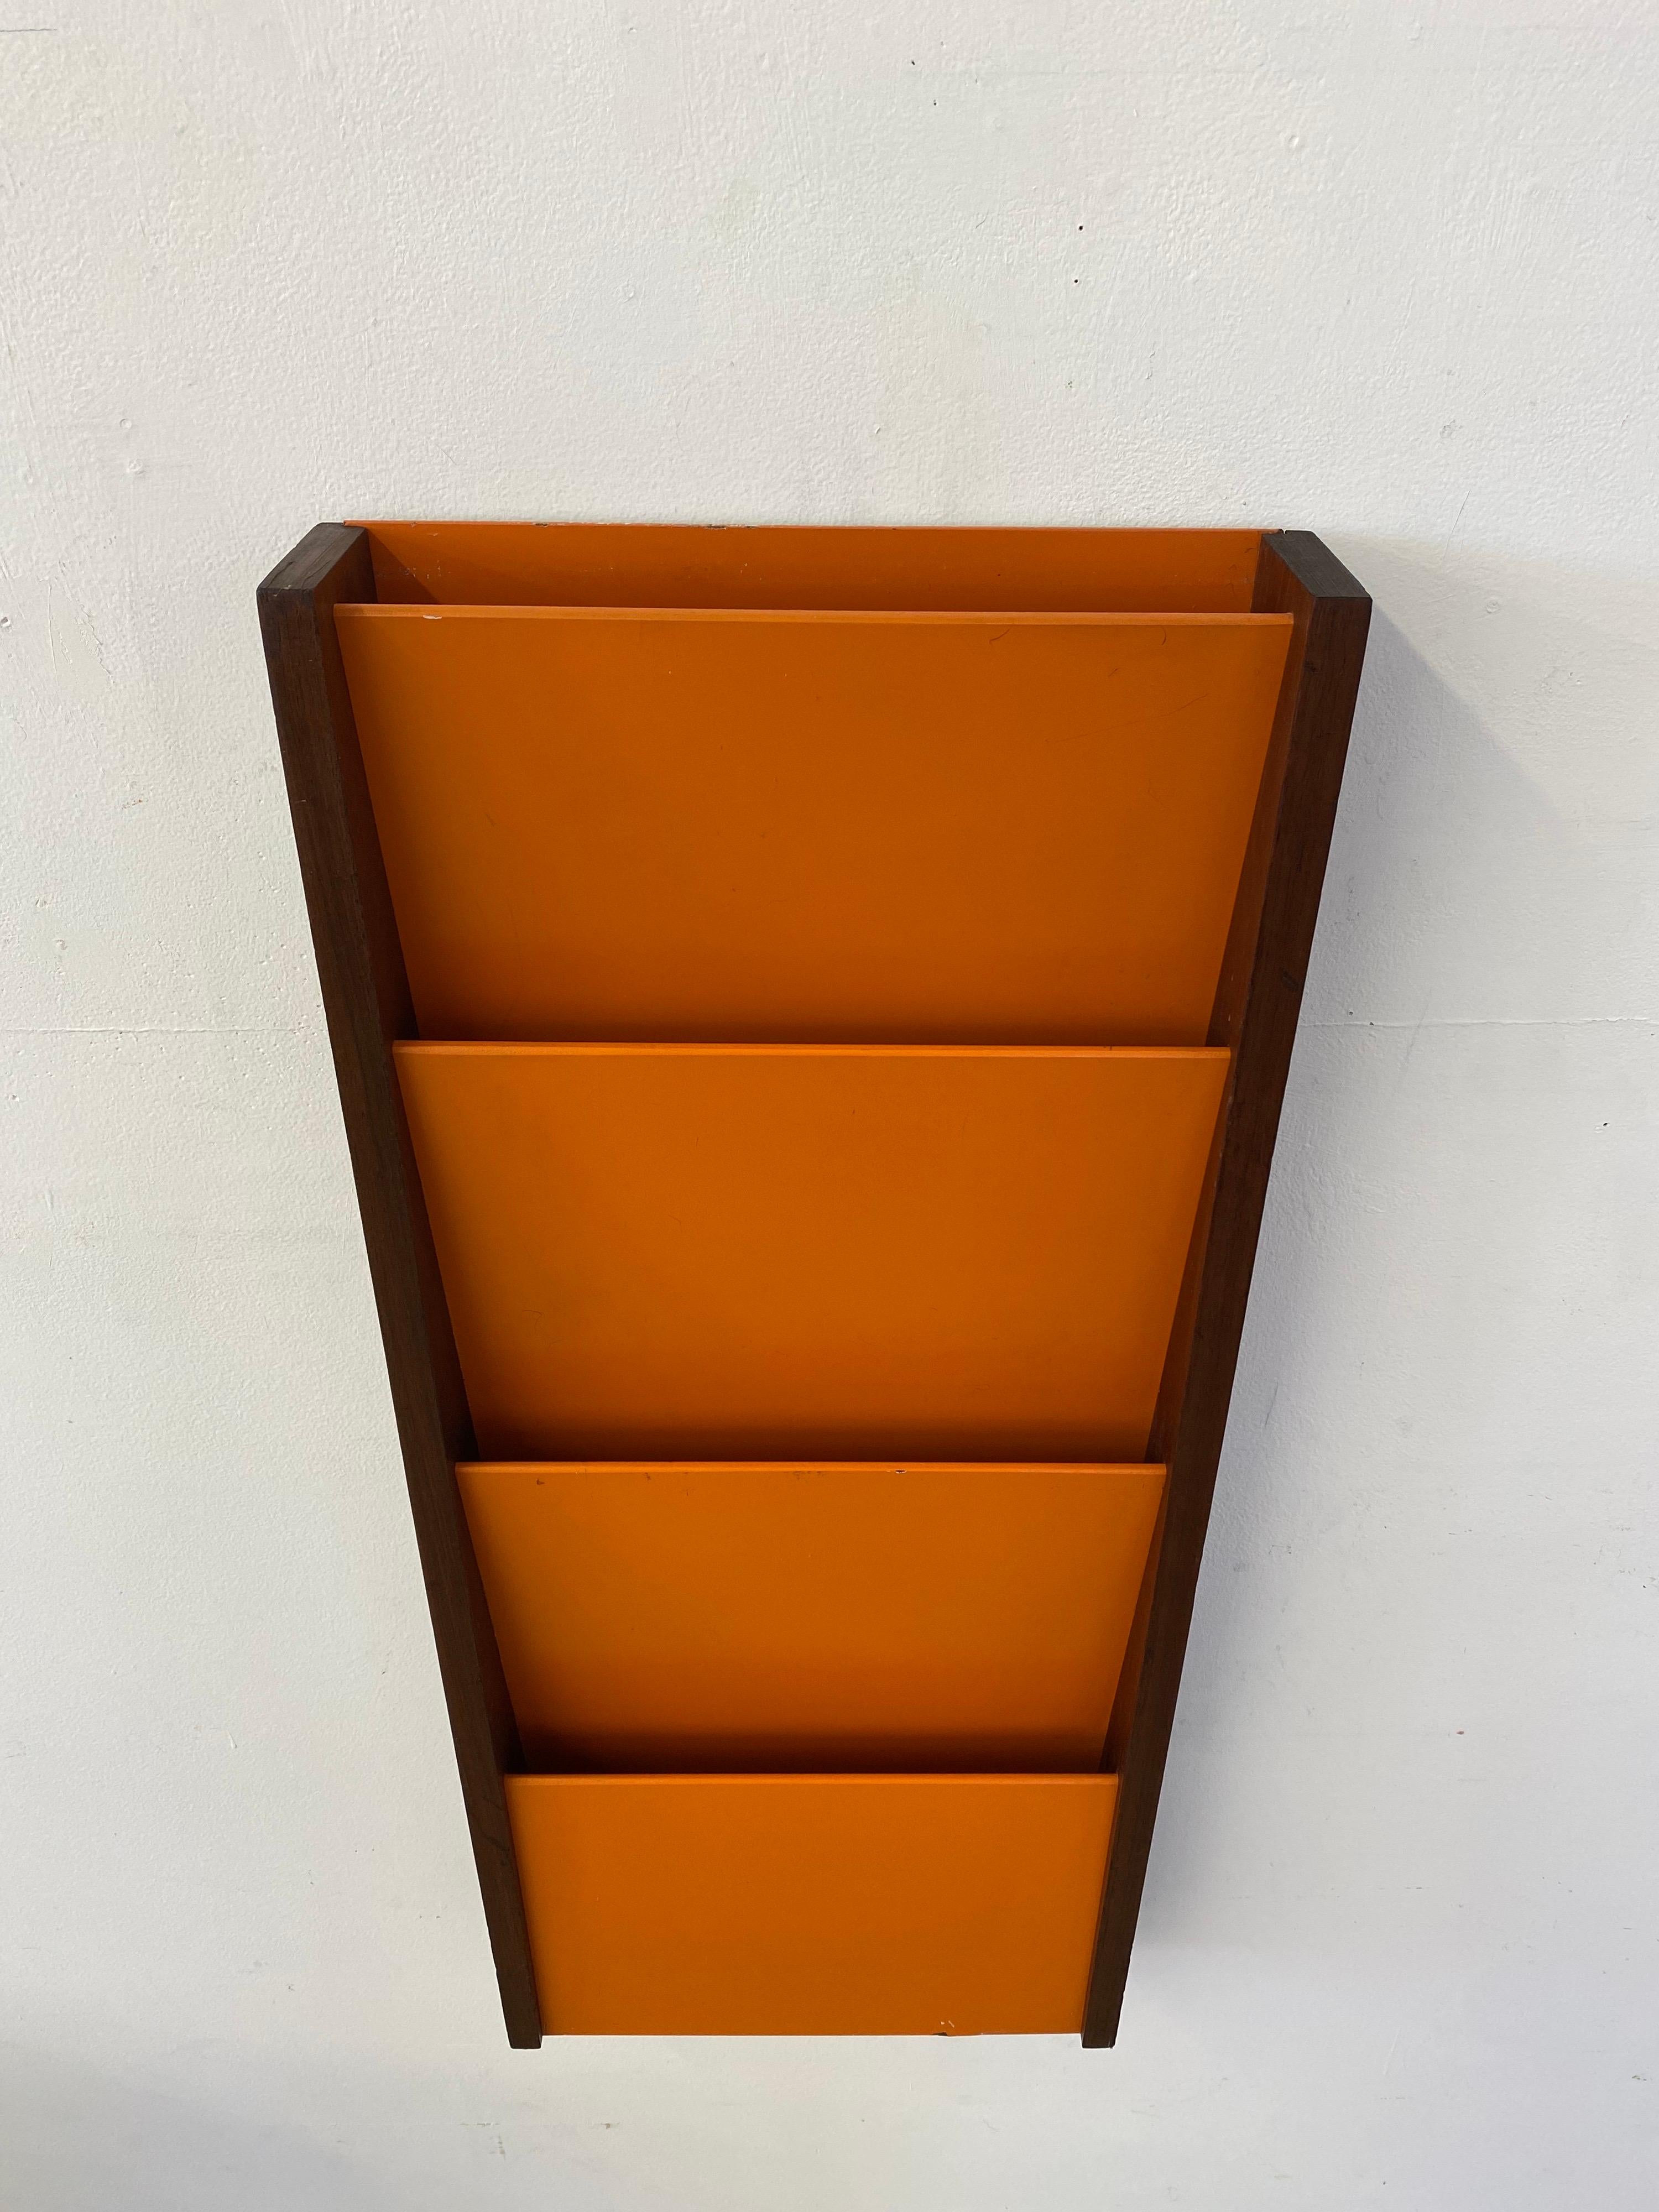 Peter Pepper product walnut and orange painted Masonite wall magazine rack. Great color combo! All original condition. Couple spots of paint loss and broken edge to back bottom as seen in photos. From the front you don't see the torn piece of